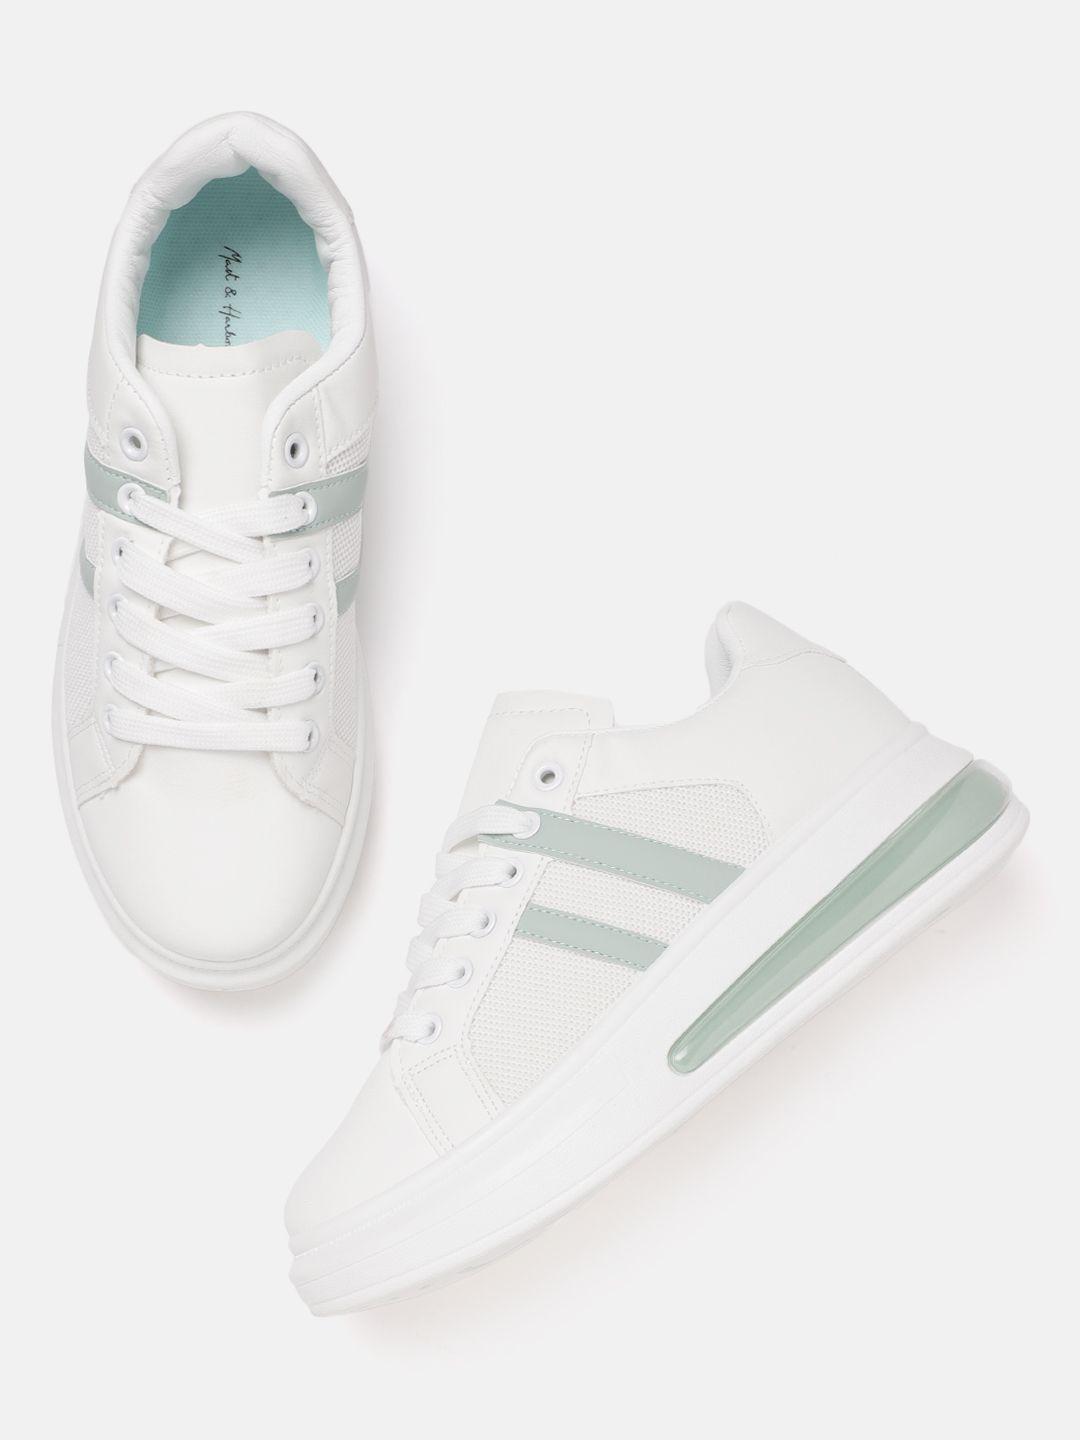 mast & harbour women white & green striped sneakers